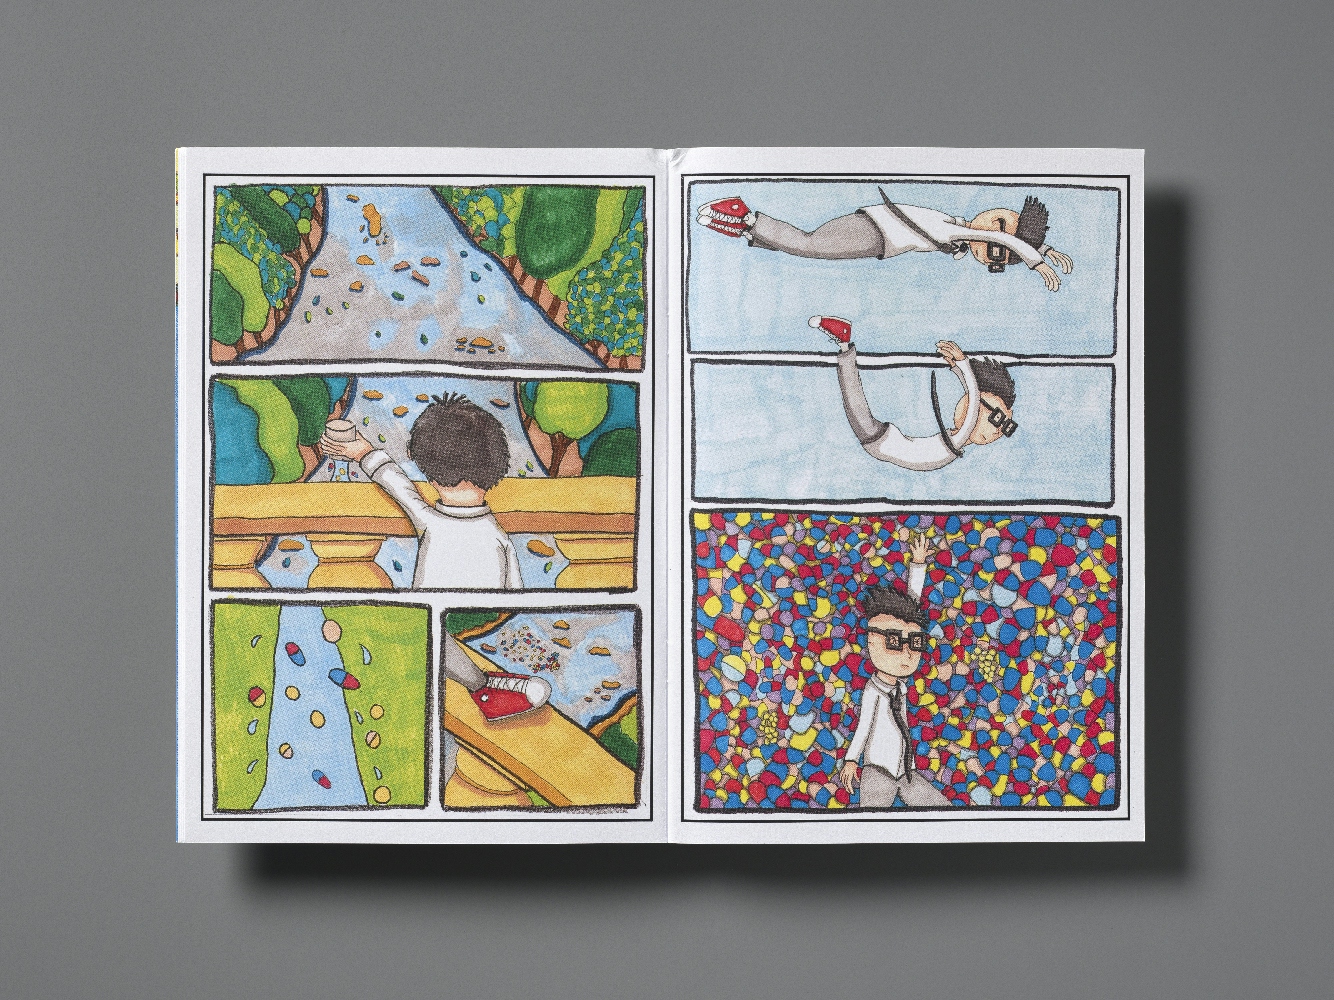 A double page spread of a comic showing, over 7 panels, a young man with thick square glasses looking down onto a river and landscape from a balcony, then jumping off the balcony to fall and land in a mass of multi-coloured pills.